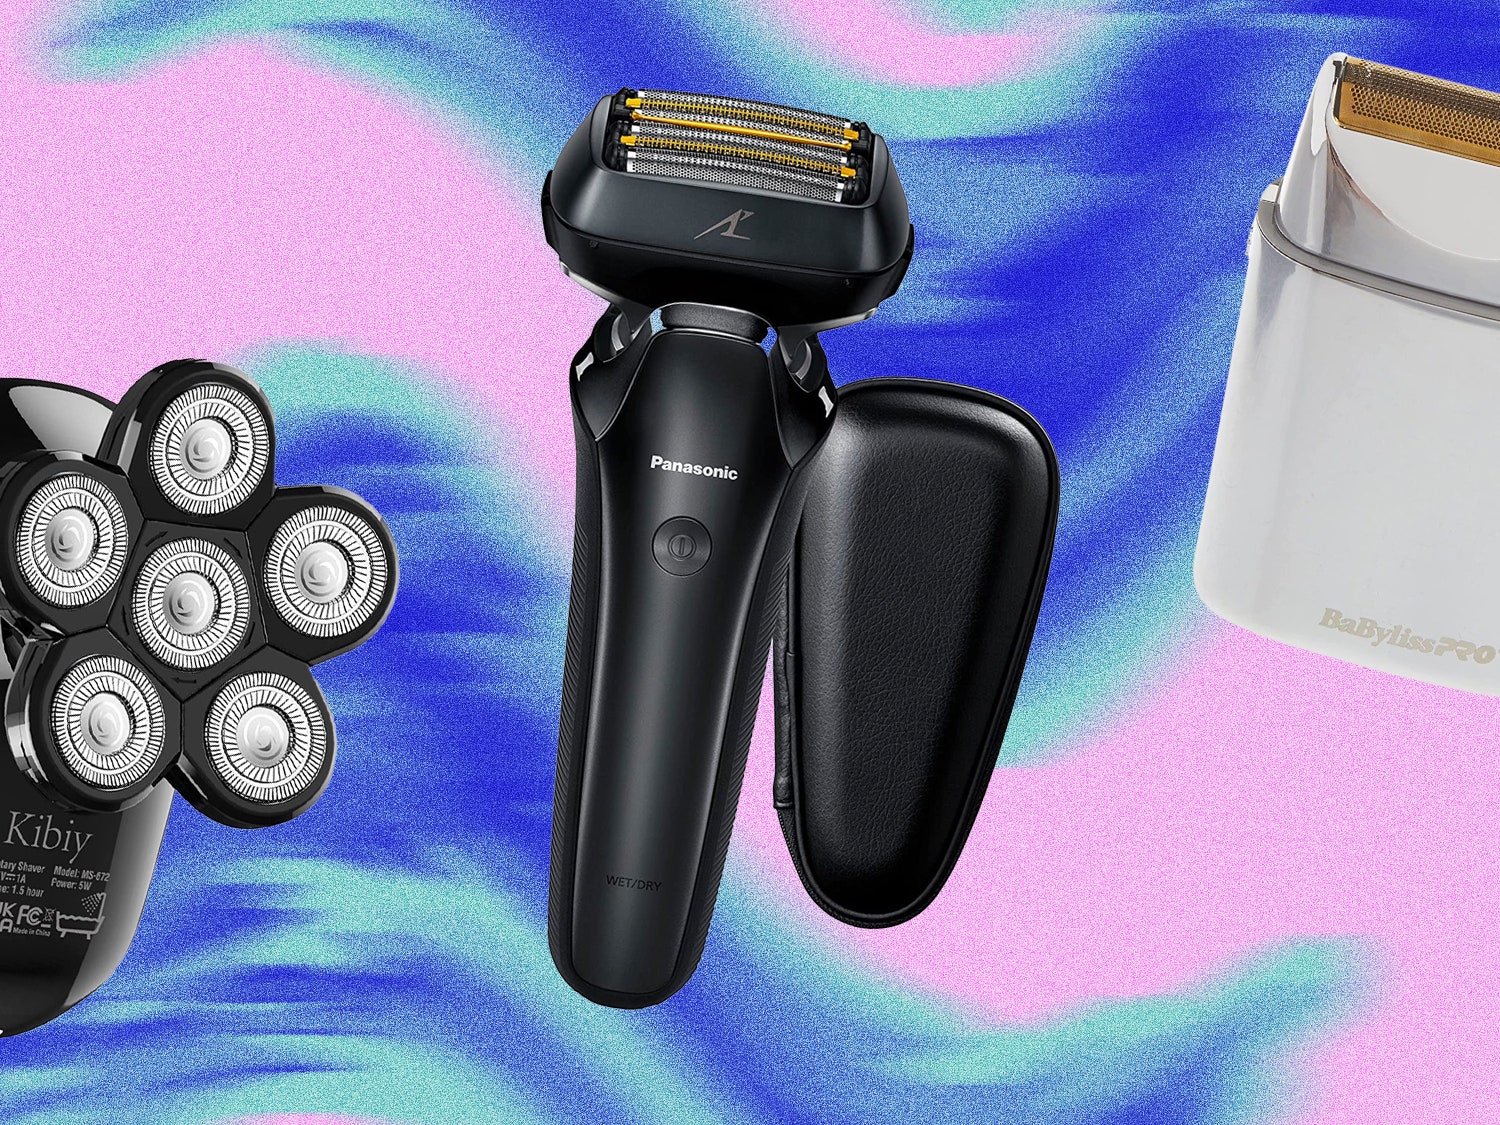 The Best Electric Shavers Are Faster and More Comfortable Than a Razor